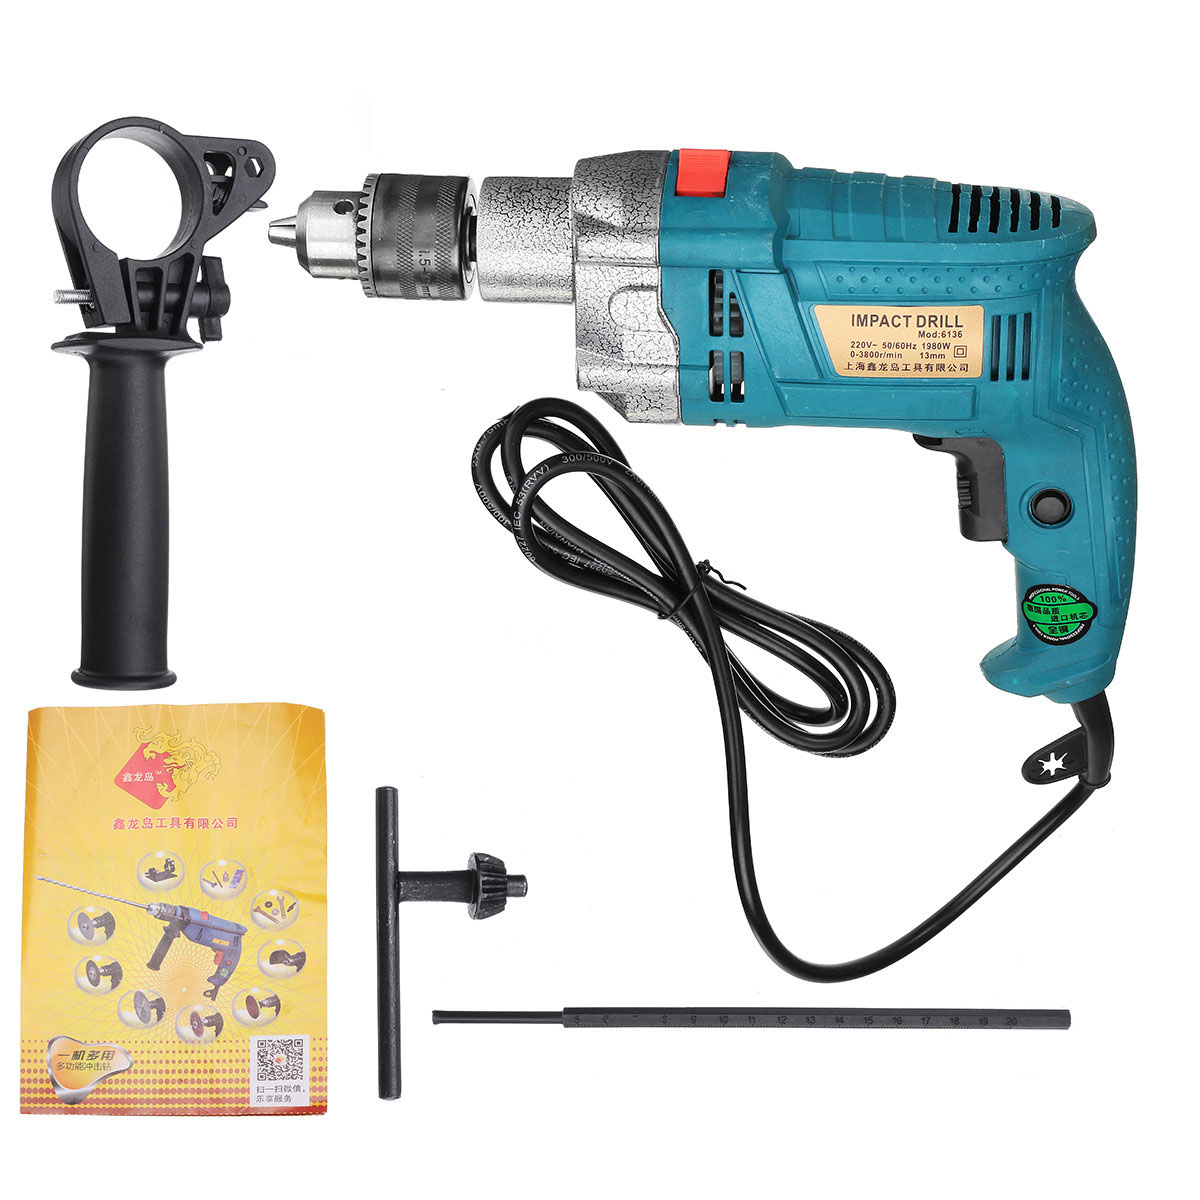 1980W-3800rpm-Electric-Impact-Drill-360deg-Rotary-Skid-Proof-Handle-With-Depth-Measuring-Scale-Spina-1715301-9